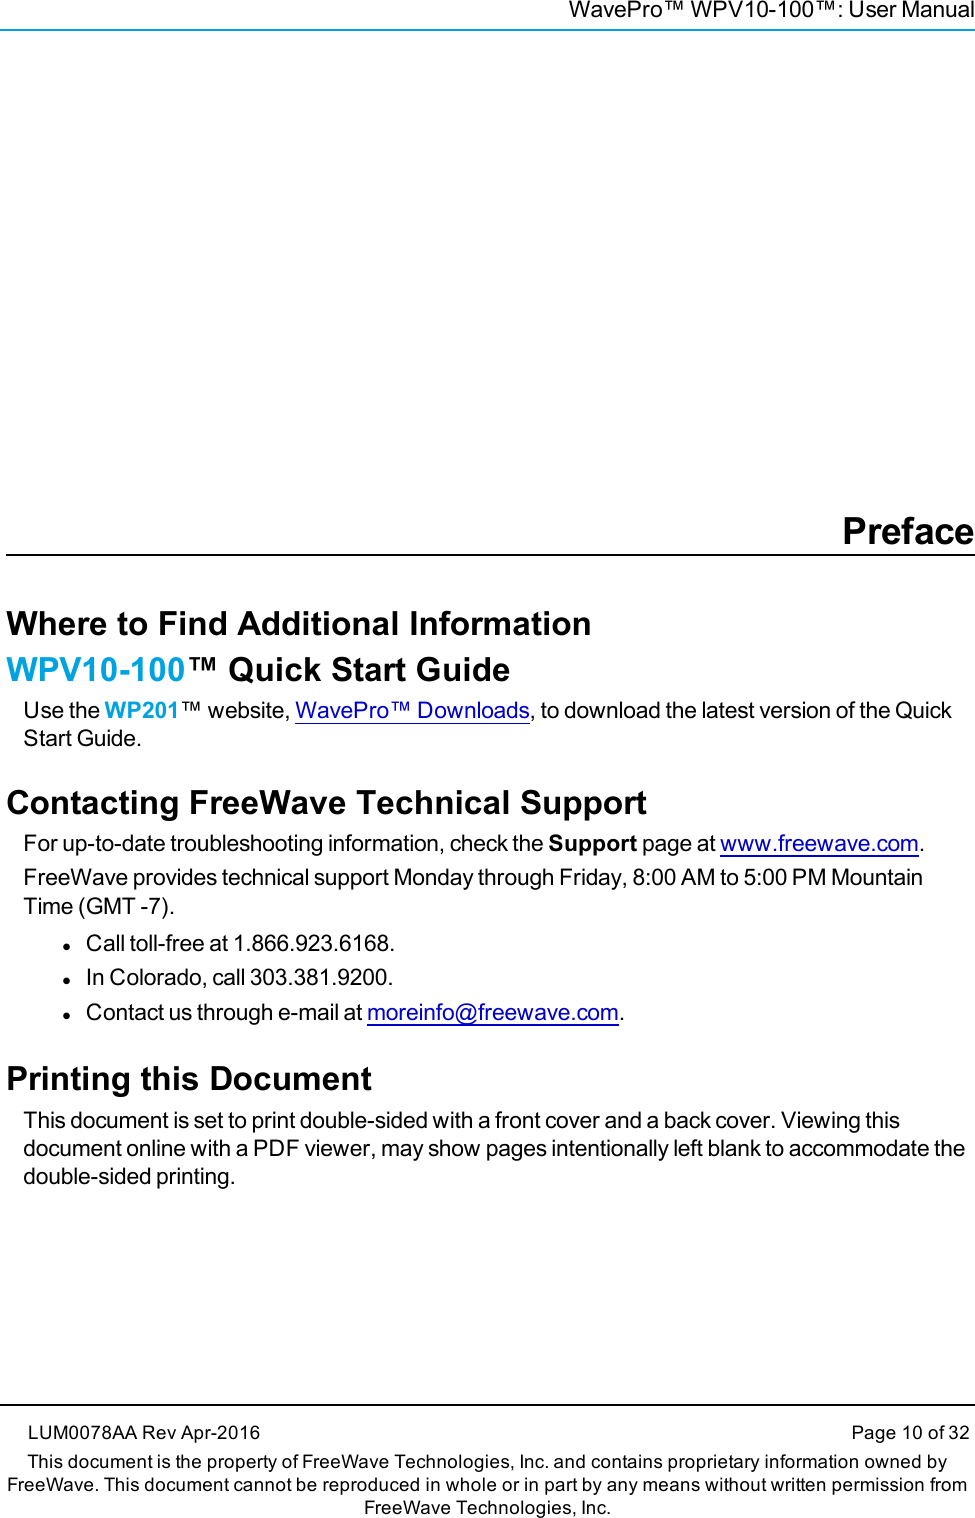 WavePro™ WPV10-100™: User ManualPrefaceWhere to Find Additional InformationWPV10-100™ Quick Start GuideUse the WP201™ website, WavePro™ Downloads, to download the latest version of the QuickStart Guide.Contacting FreeWave Technical SupportFor up-to-date troubleshooting information, check the Support page at www.freewave.com.FreeWave provides technical support Monday through Friday, 8:00 AM to 5:00 PM MountainTime (GMT -7).lCall toll-free at 1.866.923.6168.lIn Colorado, call 303.381.9200.lContact us through e-mail at moreinfo@freewave.com.Printing this DocumentThis document is set to print double-sided with a front cover and a back cover. Viewing thisdocument online with a PDF viewer, may show pages intentionally left blank to accommodate thedouble-sided printing.LUM0078AA Rev Apr-2016 Page 10 of 32This document is the property of FreeWave Technologies, Inc. and contains proprietary information owned byFreeWave. This document cannot be reproduced in whole or in part by any means without written permission fromFreeWave Technologies, Inc.